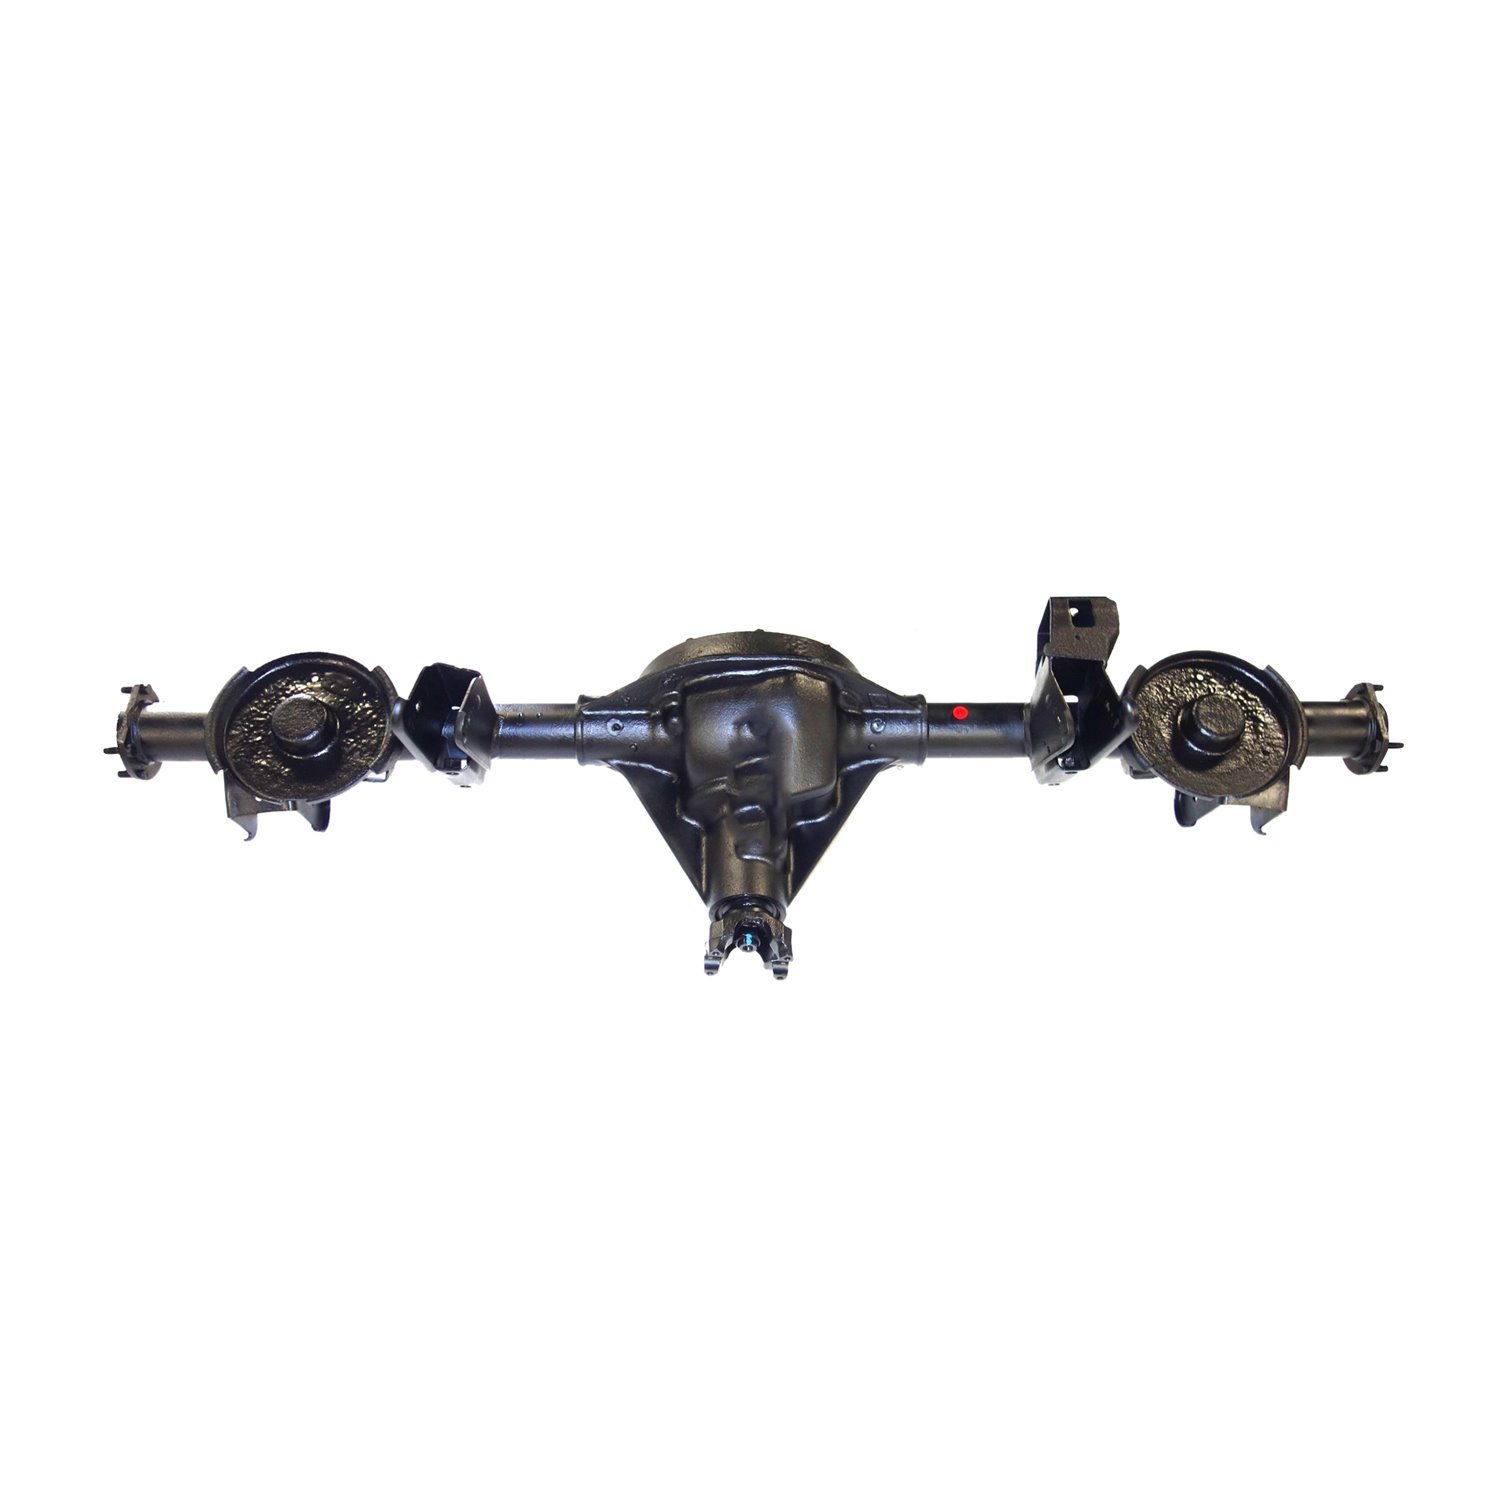 Remanufactured Complete Axle Assembly for Dana 35 03-05 Jeep Wrangler 4.11 Ratio